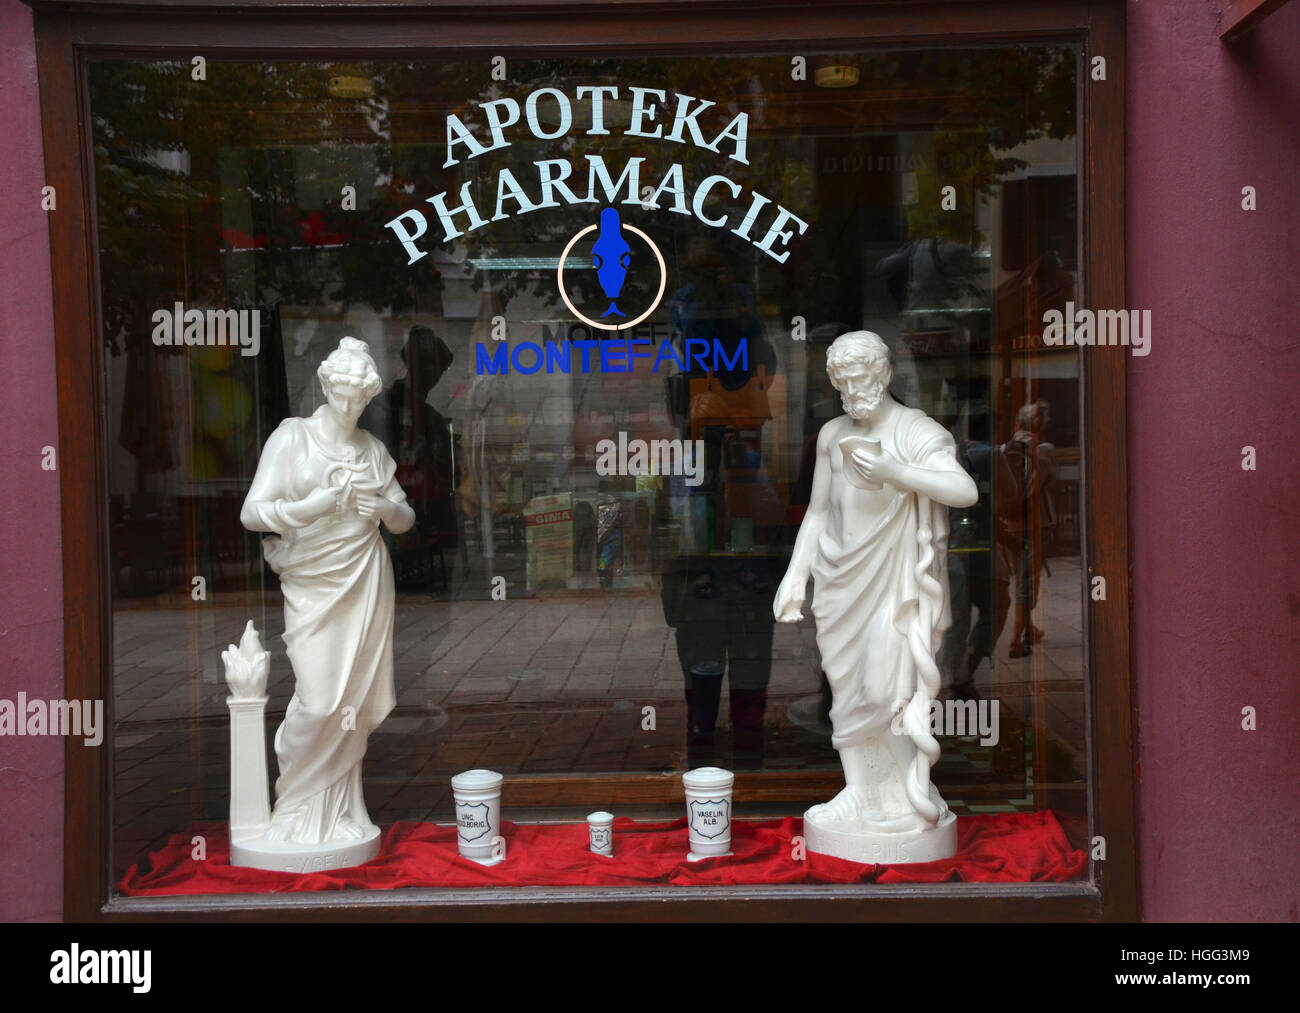 Pharmacy shop window depicting statues of the  greek gods of healing and medicine  - Hygeia and her father Asklepius. Stock Photo